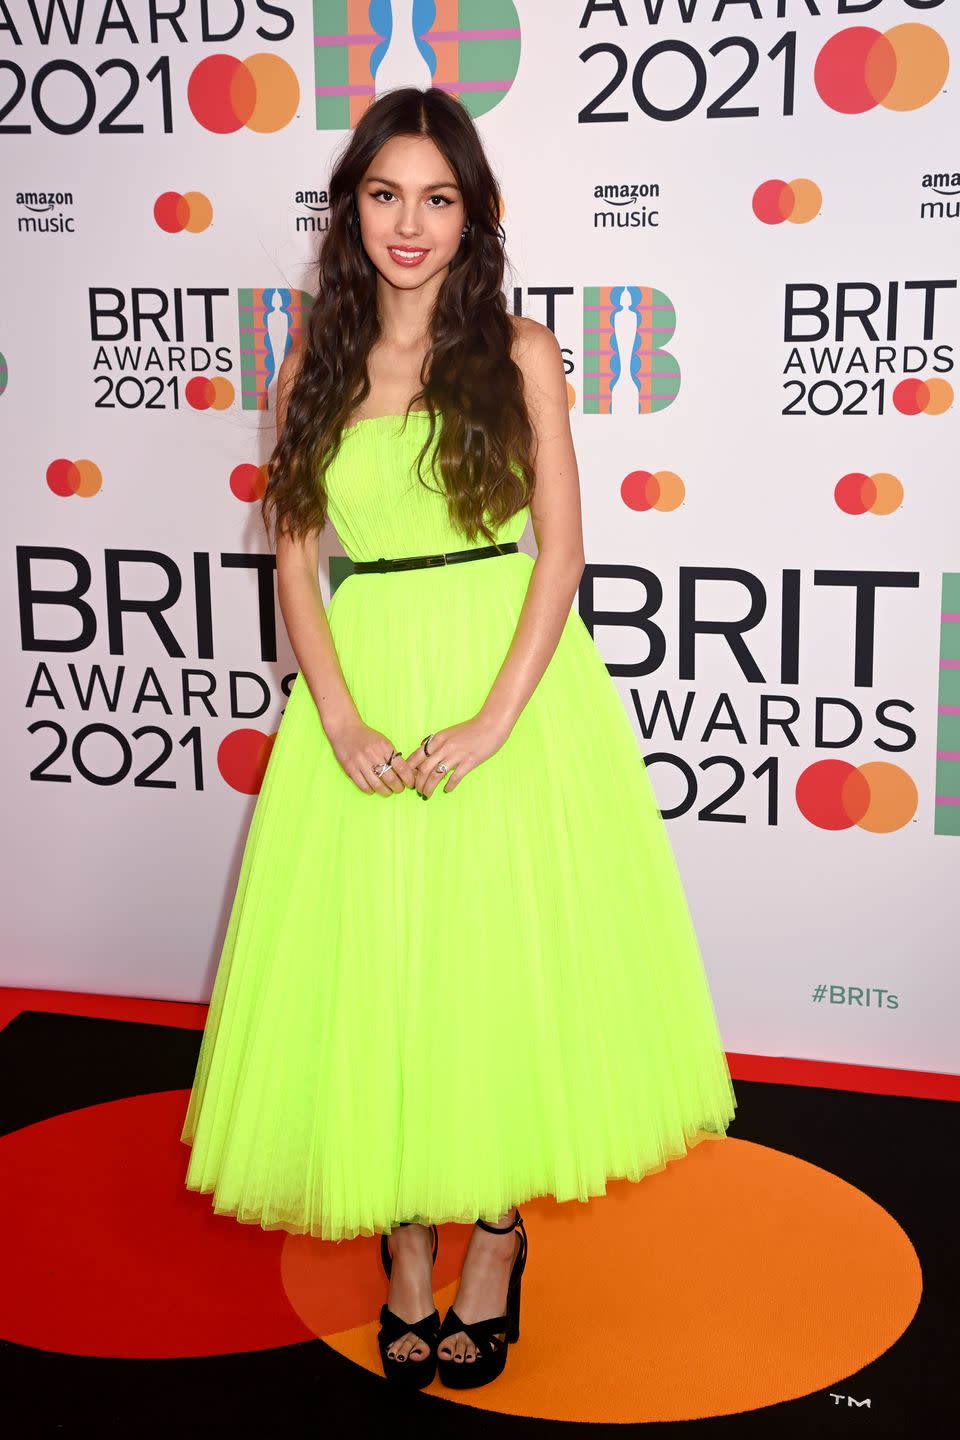 london, england may 11 olivia rodrigo attends the brit awards 2021 at the o2 arena on may 11, 2021 in london, england photo by dave j hogandave j hogangetty images